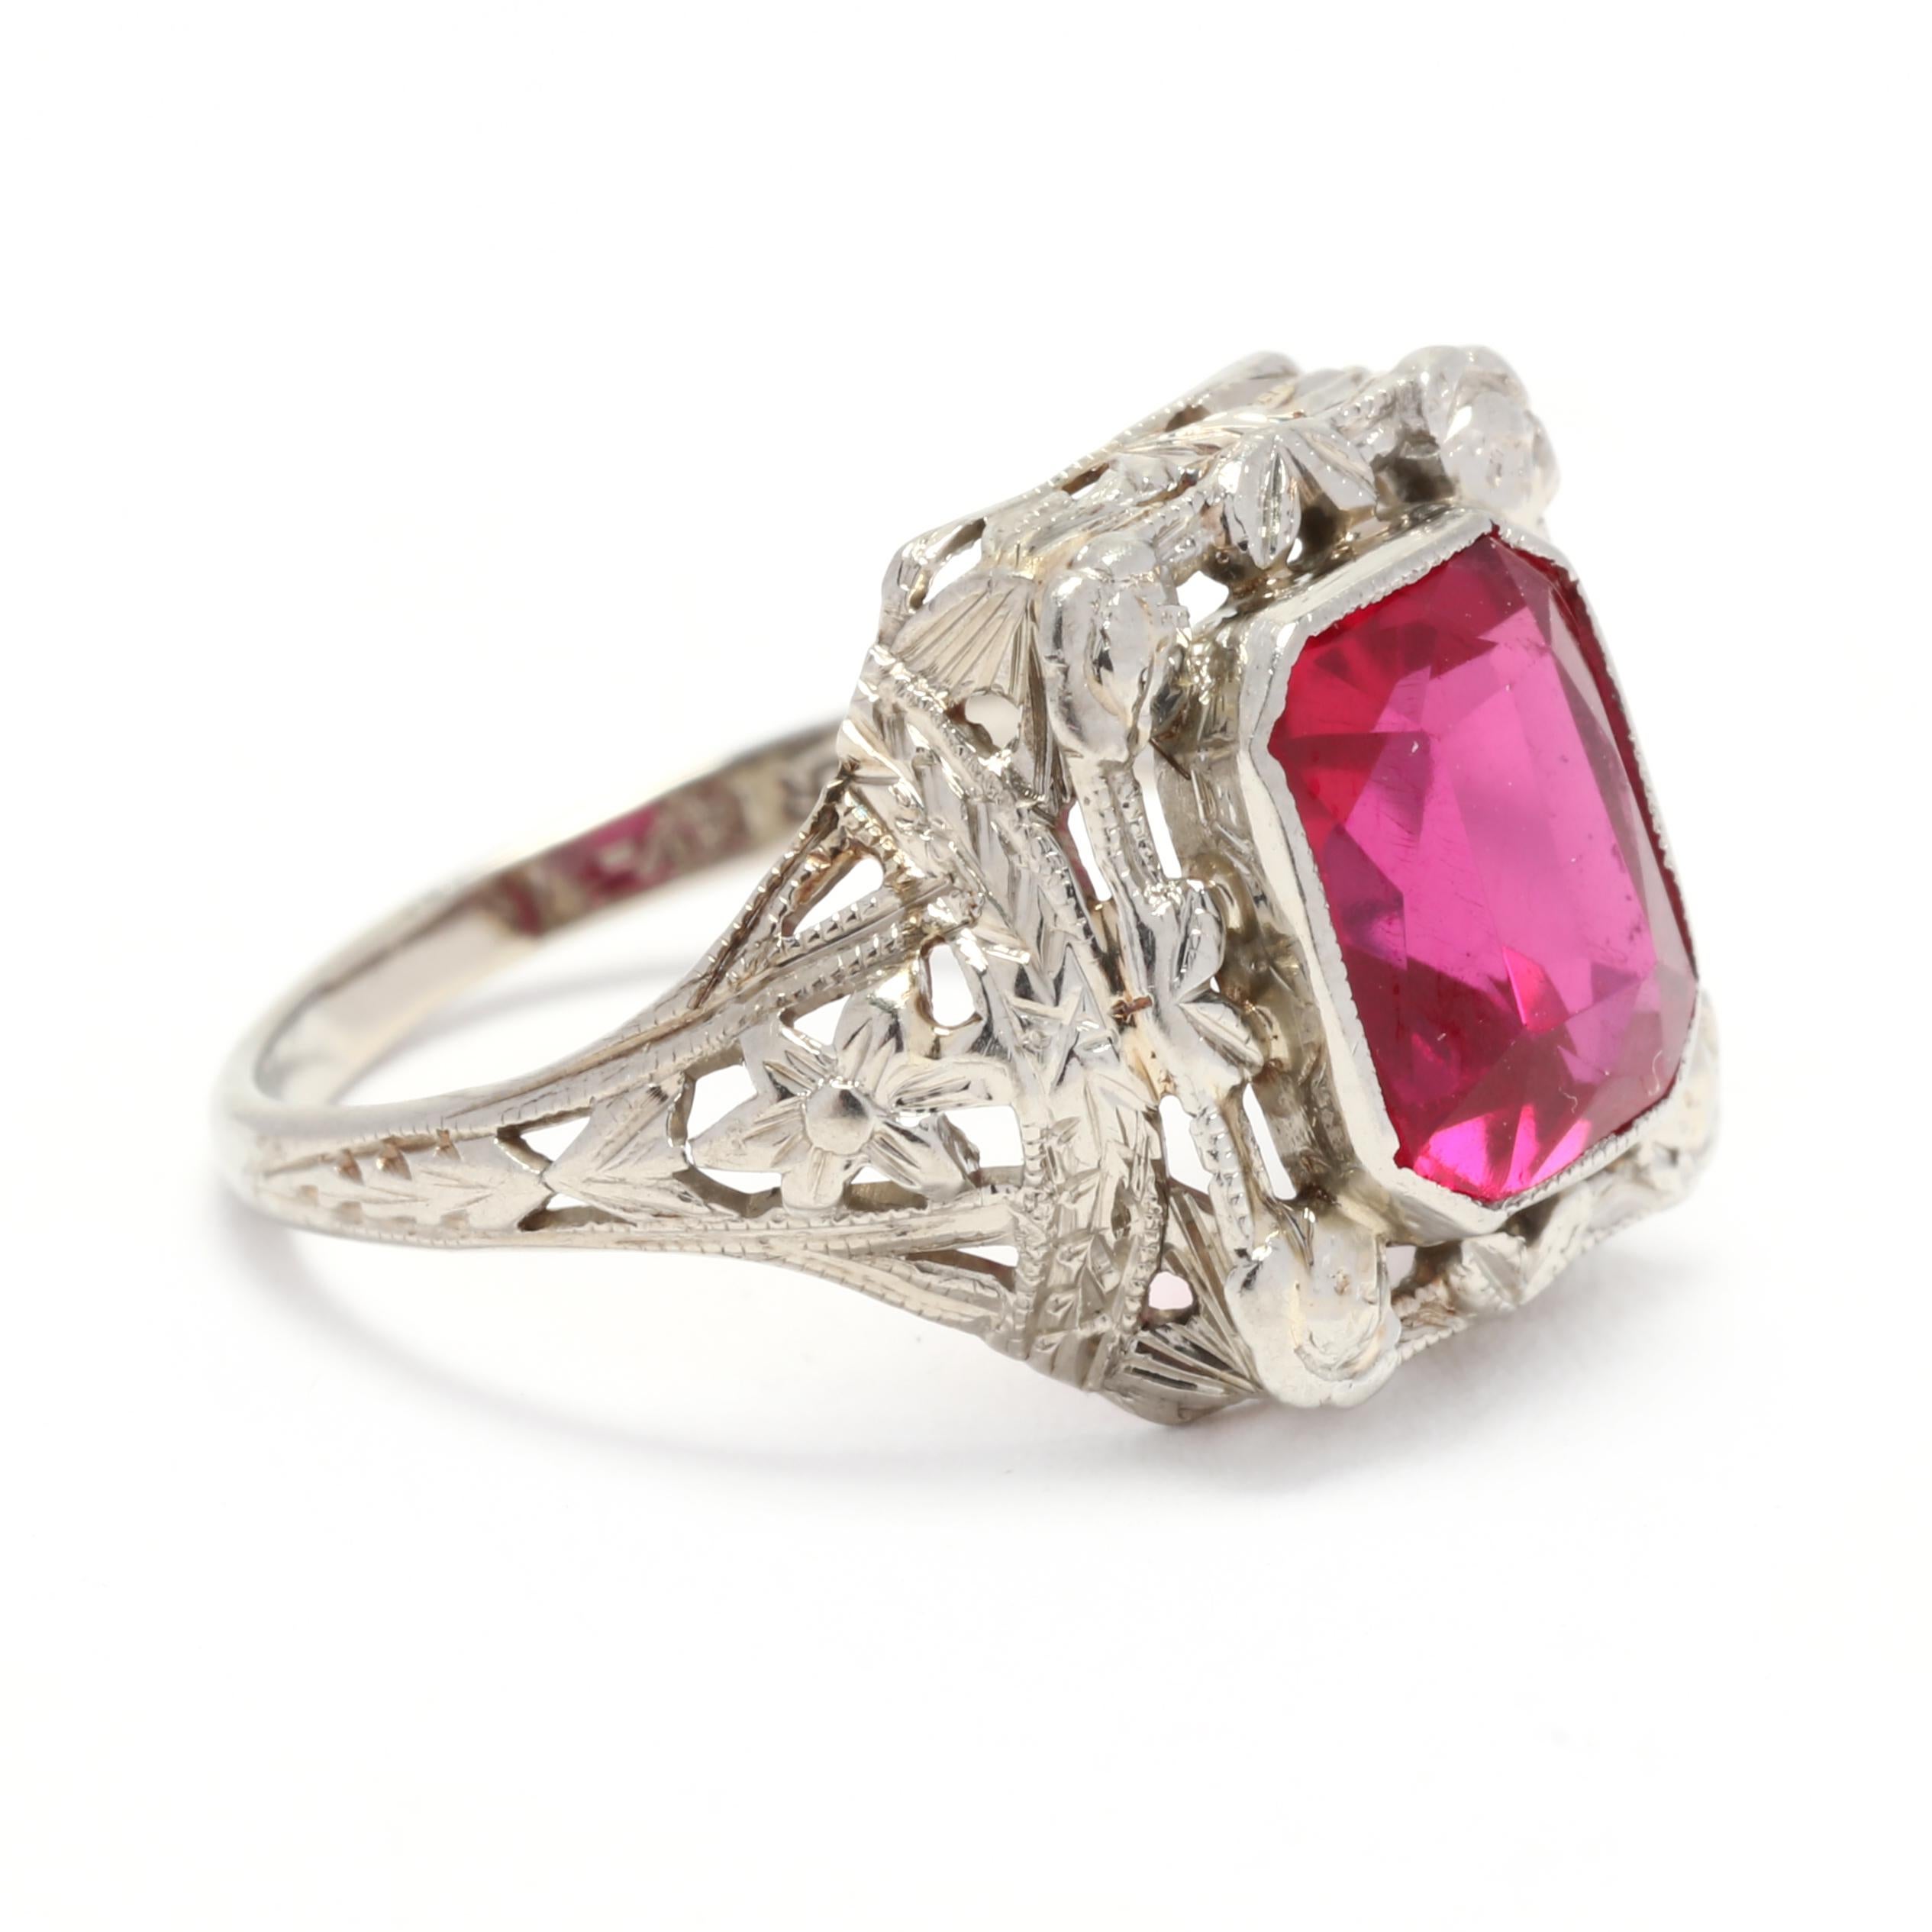 This stunning vintage synthetic ruby ring is a true statement piece that will surely turn heads. Crafted in 14K white gold, the ring features a 2-carat synthetic ruby as the centerpiece. The ruby is cut in a floral shape and surrounded by intricate